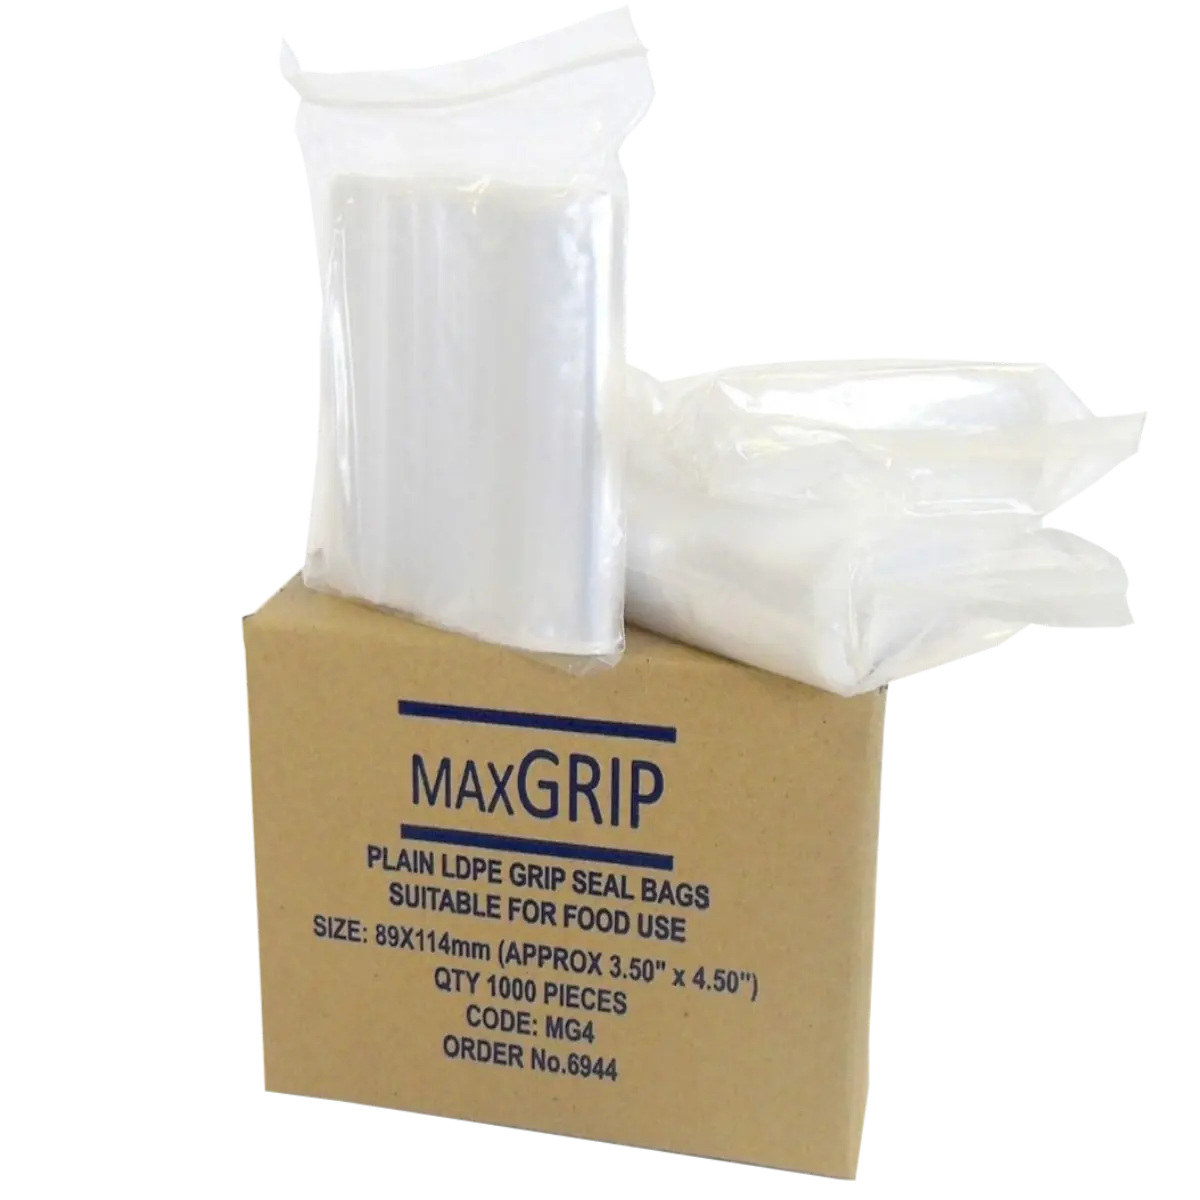 Grip seal bags keep contents together in an easy to use resealable bag